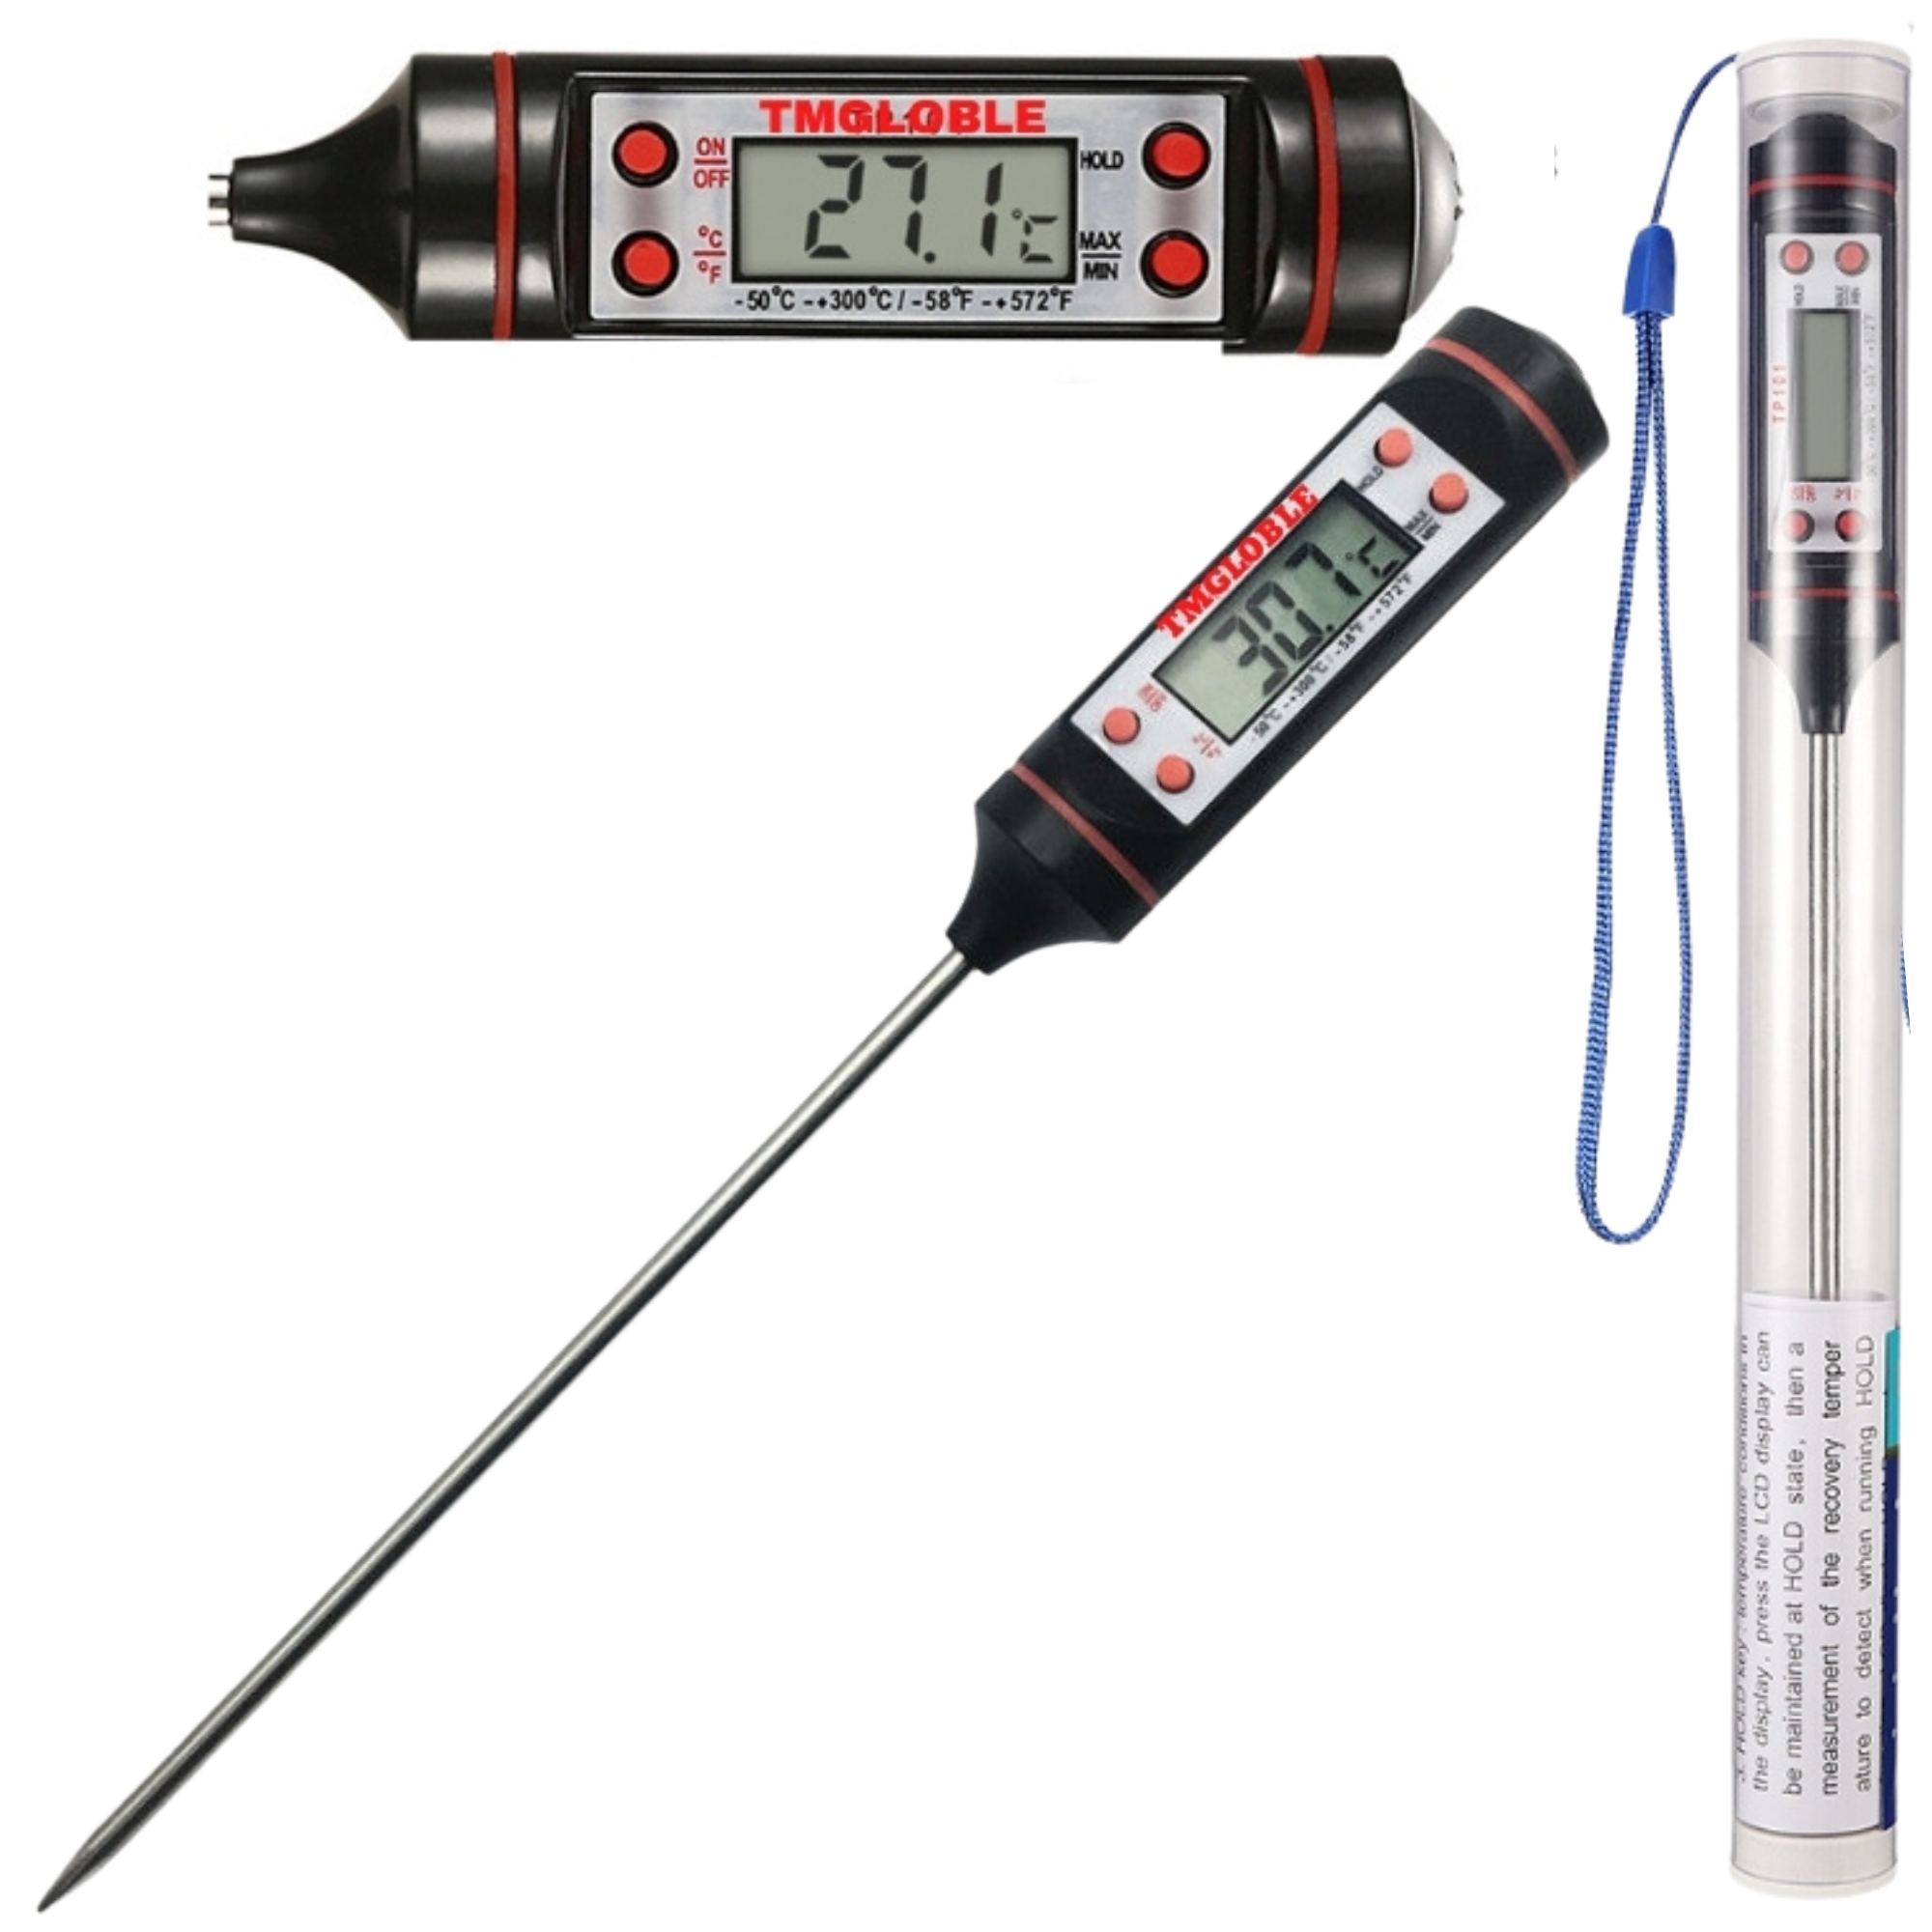 TMGLOBLE™ Kitchen Cooking Digital Meat Thermometer, Multi